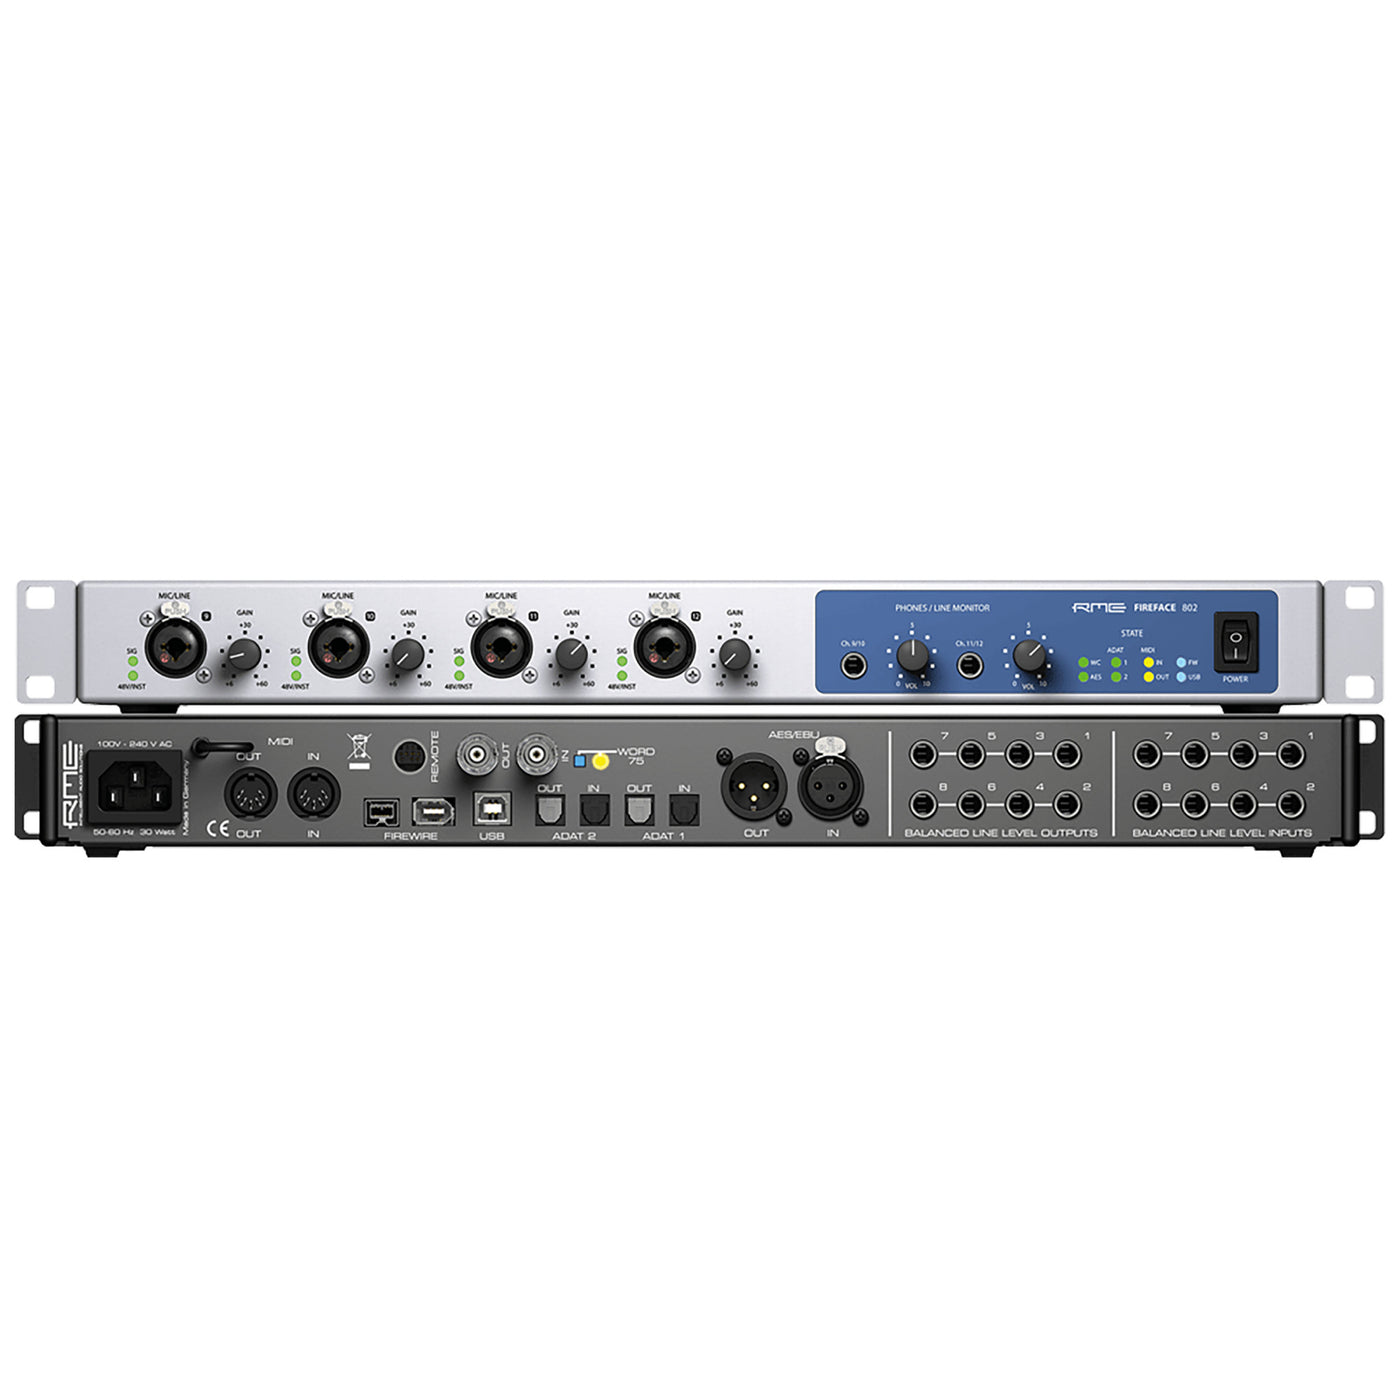 RME Fireface 802 Hybrid USB/FireWire Audio Interface with 12 x 12 Analog I/O, ADAT/SMUX and AES/EBU Digital I/O, 30-in/30-out and DSP-driven Onboard Mixing with Effects